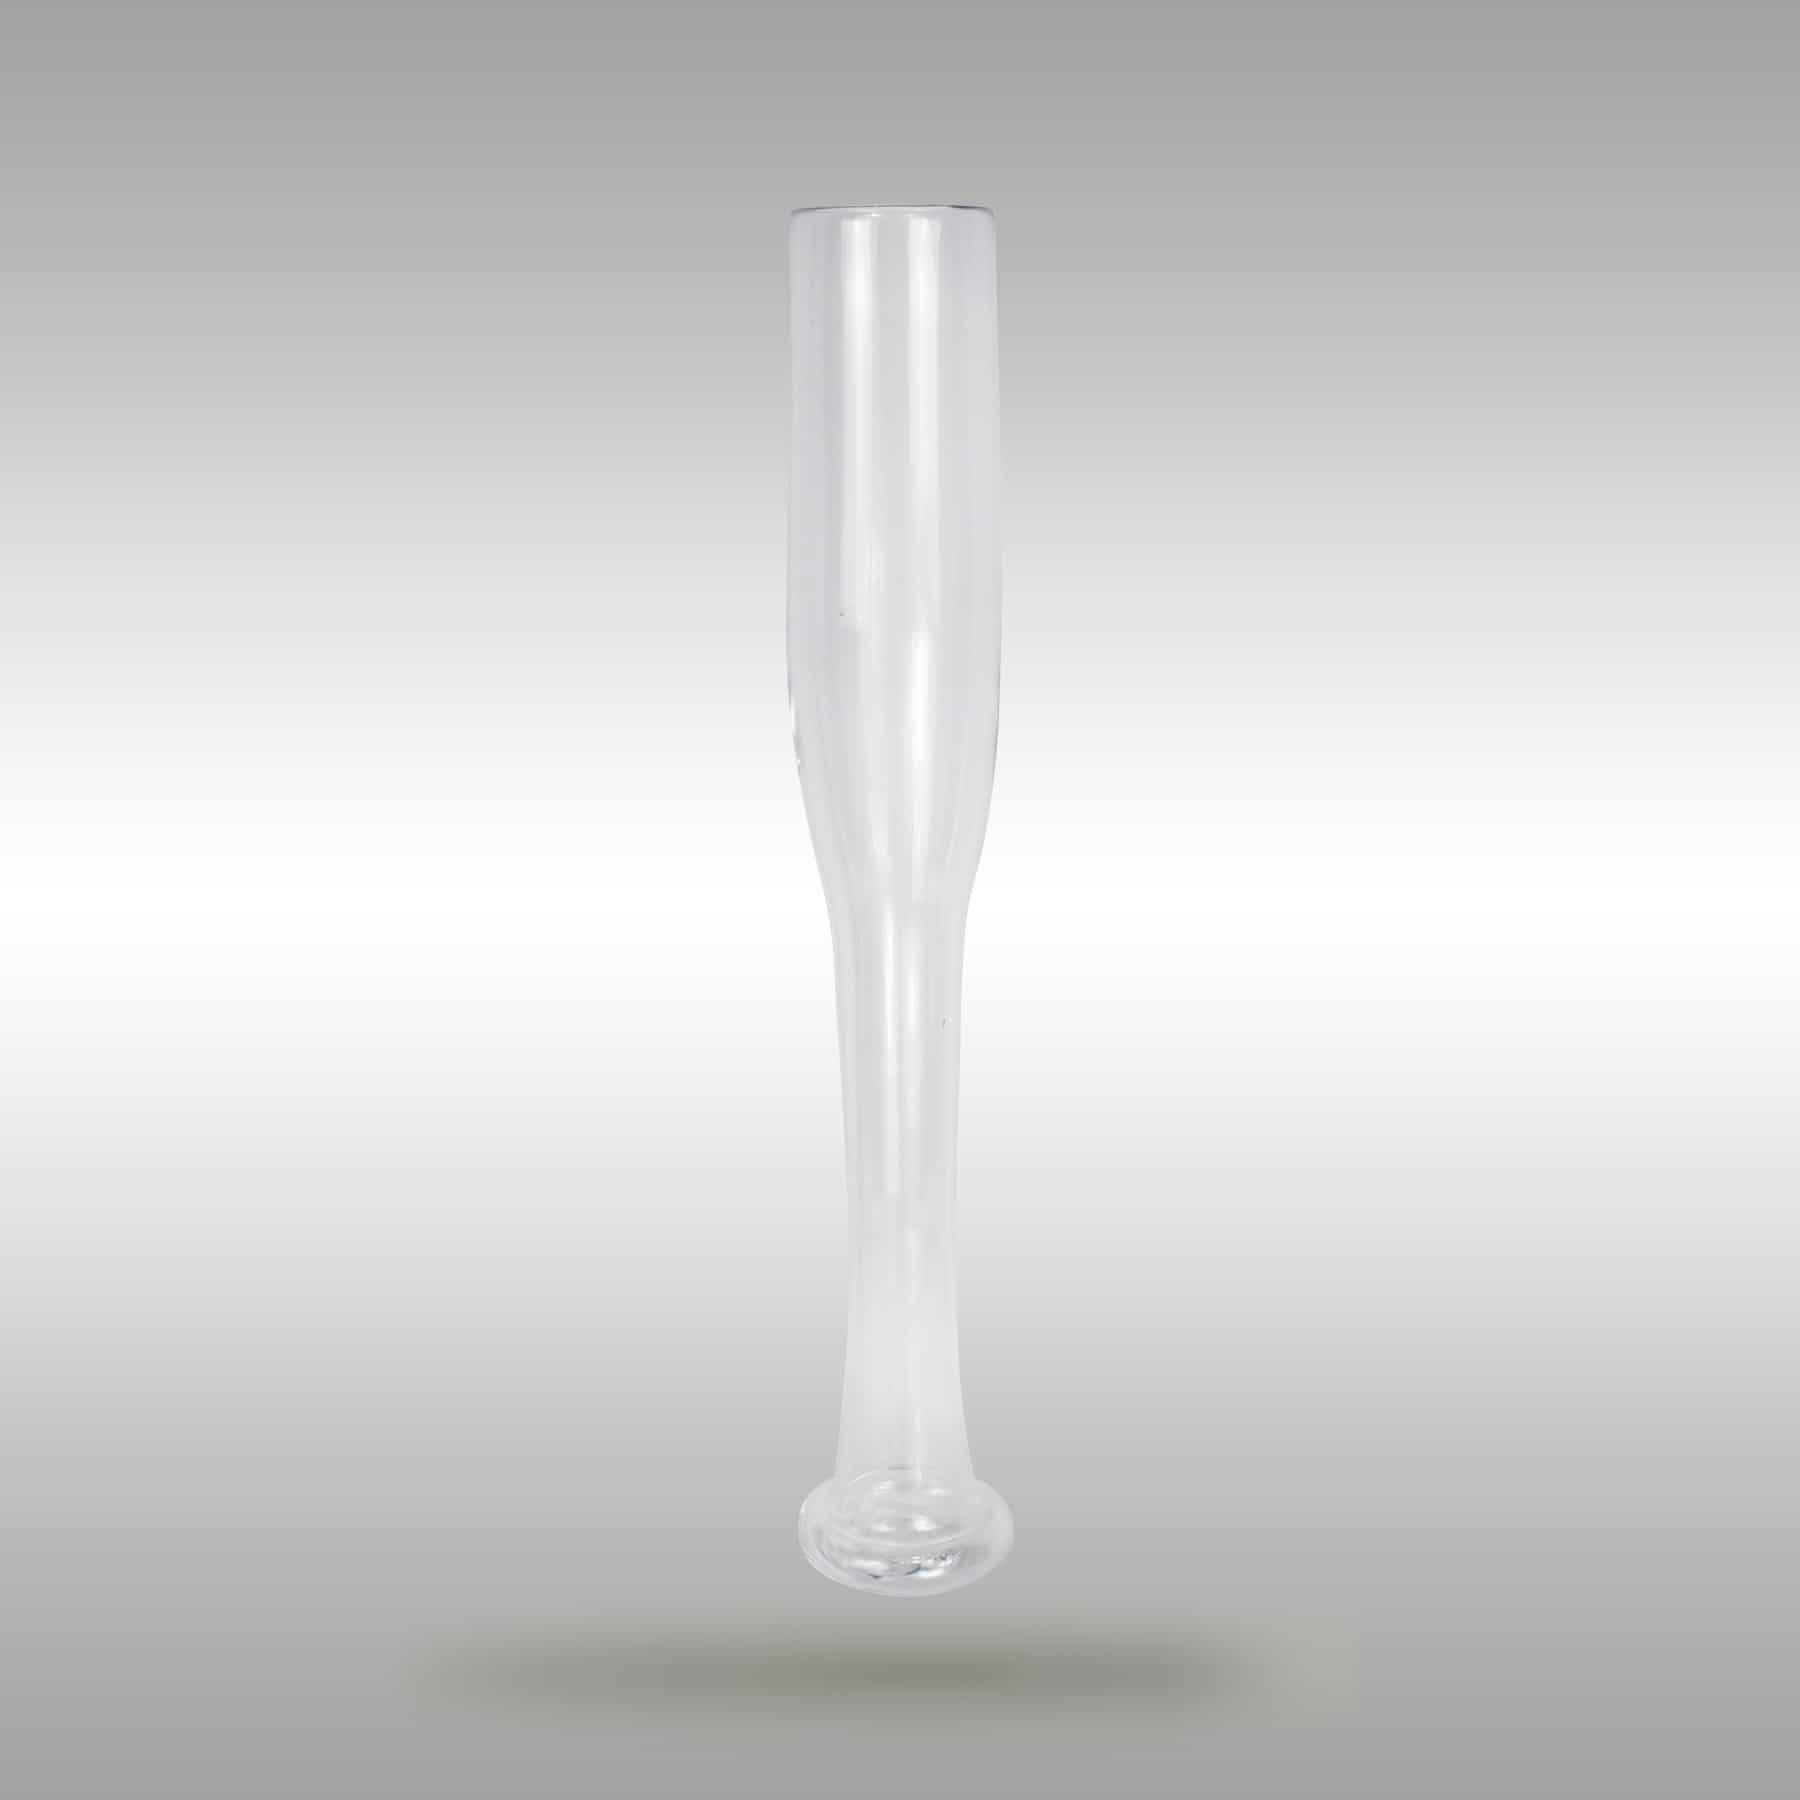 Beer Bat Blown Clear Glass - Cooperstown Bat Company